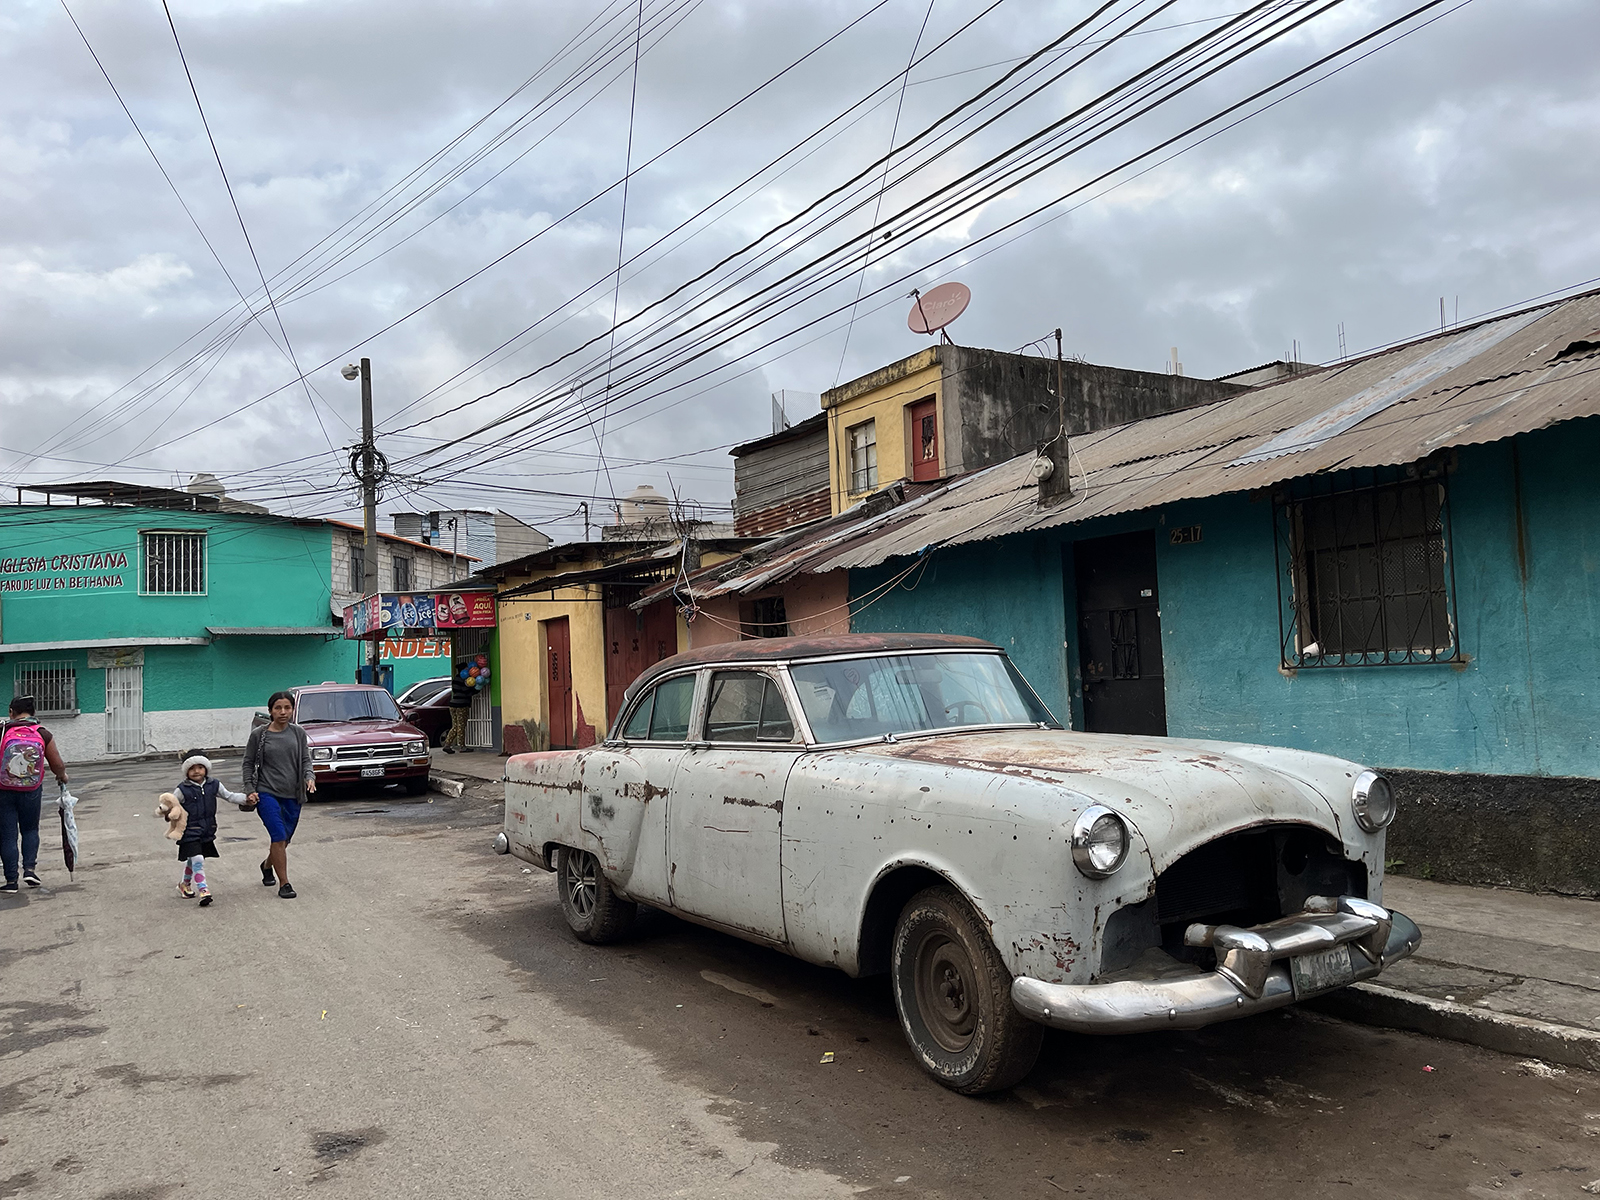 There are many poor neighbourhoods in Guatemala City, the capital of Guatemala City. (RNS photo/Catherine Pepinster)